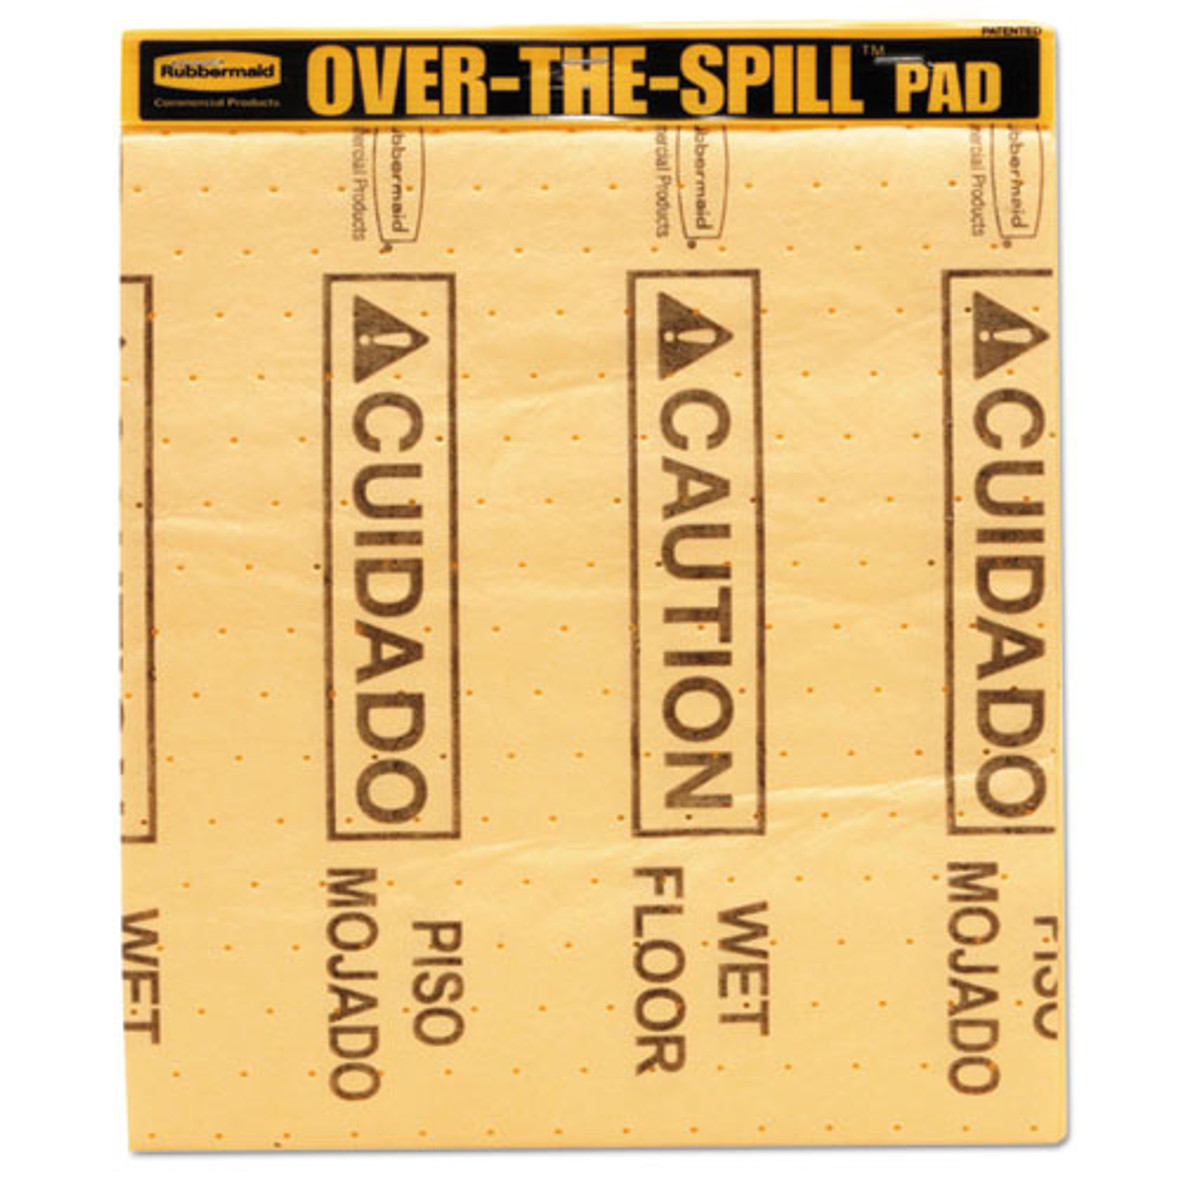 Over-the-spill Pad Tablet With Medium Spill Pads, Yellow, 22/pack